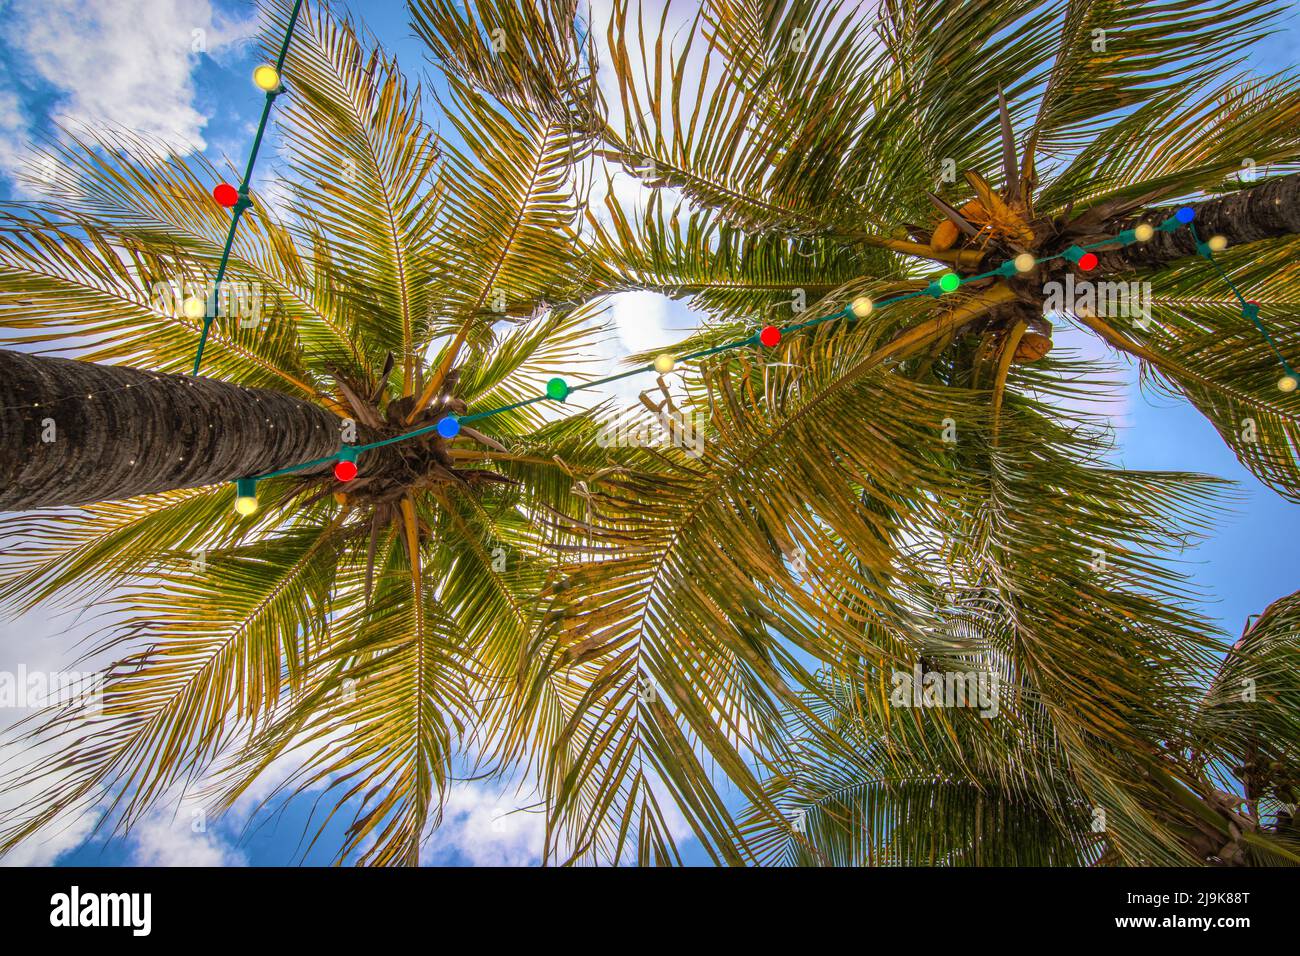 Coconut palm trees decorated with colorful party lights. Stock Photo